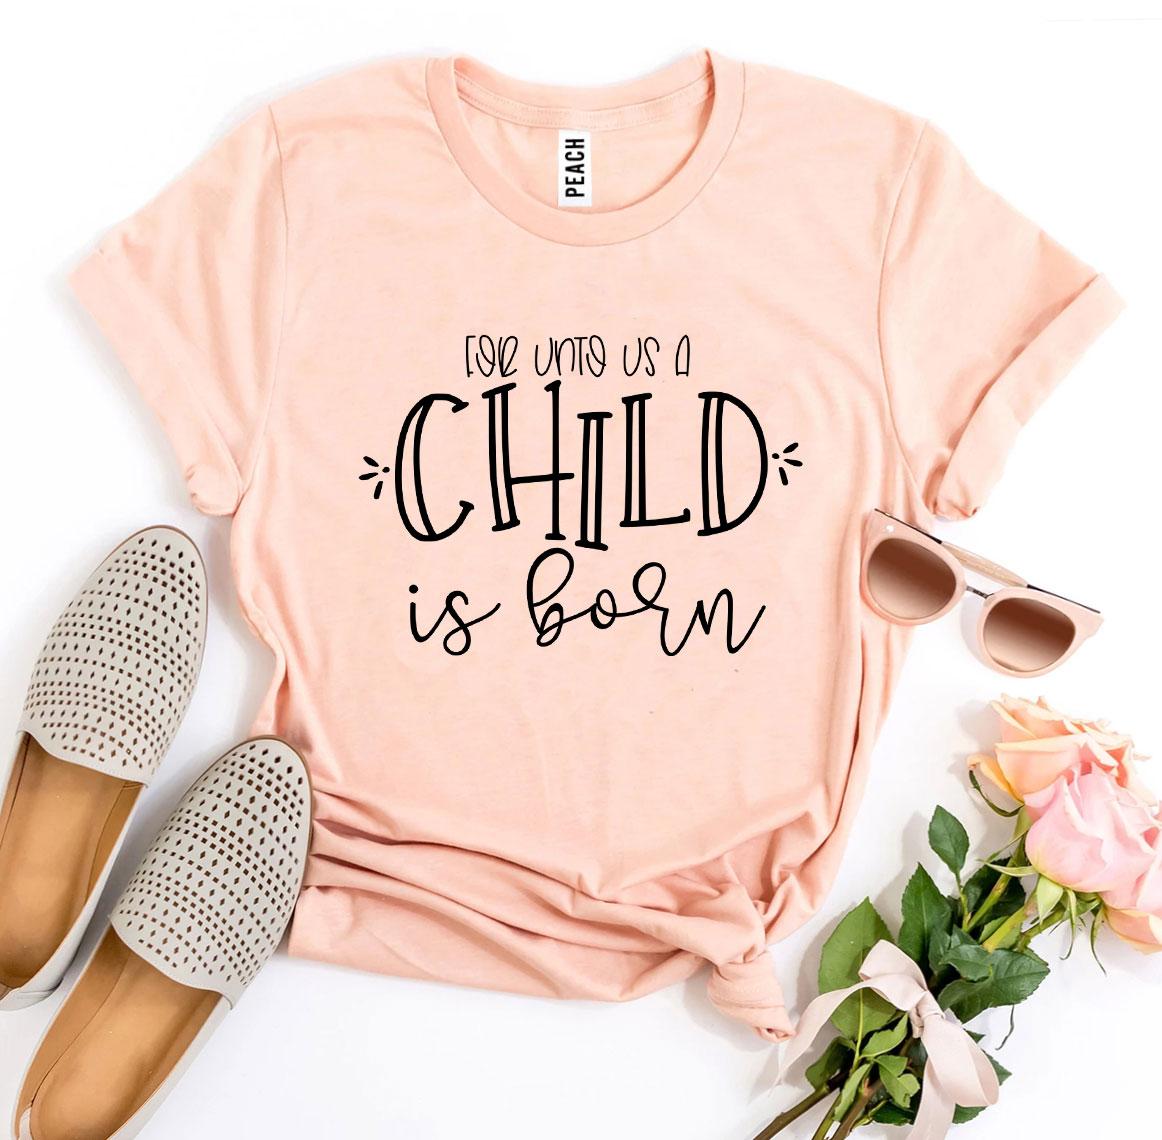 For Unto Us a Child Is Born T-shirt